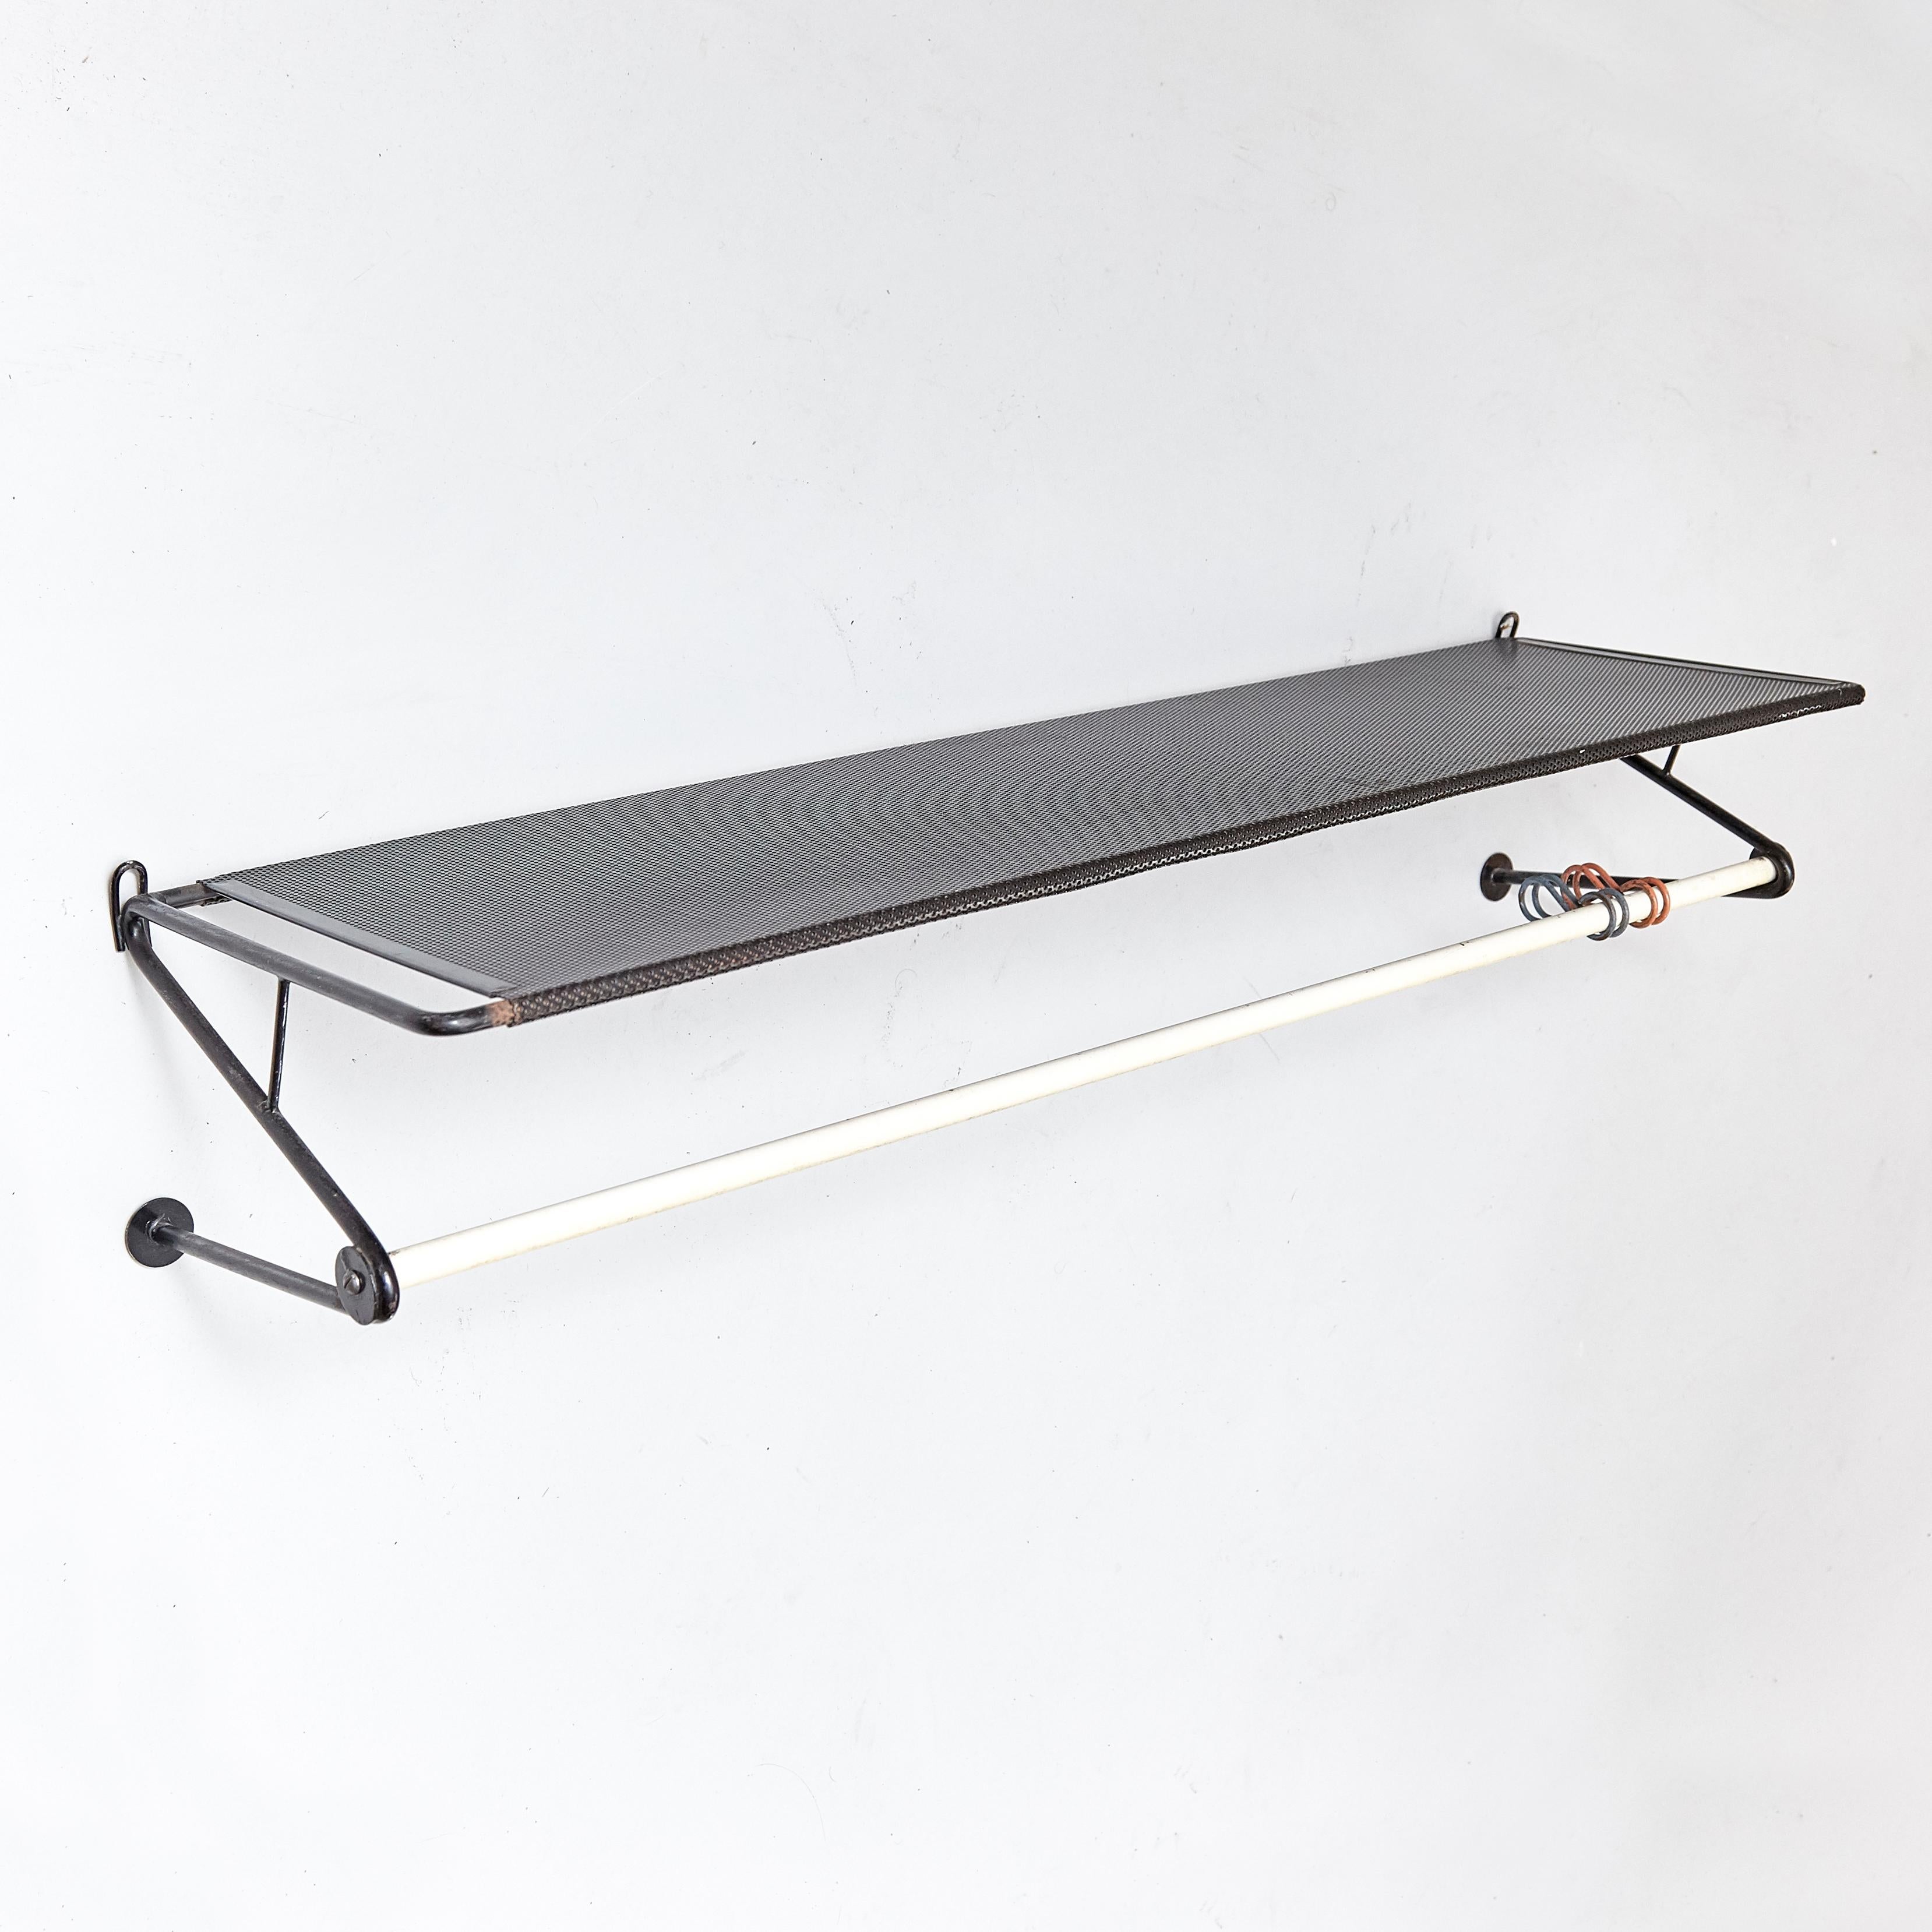 Coat rack designed by Mathieu Matégot.

Manufactured by Artimeta (Netherland), circa 1950.
Perforated, lacquered metal.

In good original condition, with minor wear consistent with age and use, preserving a beautiful patina.

Mathieu Matégot